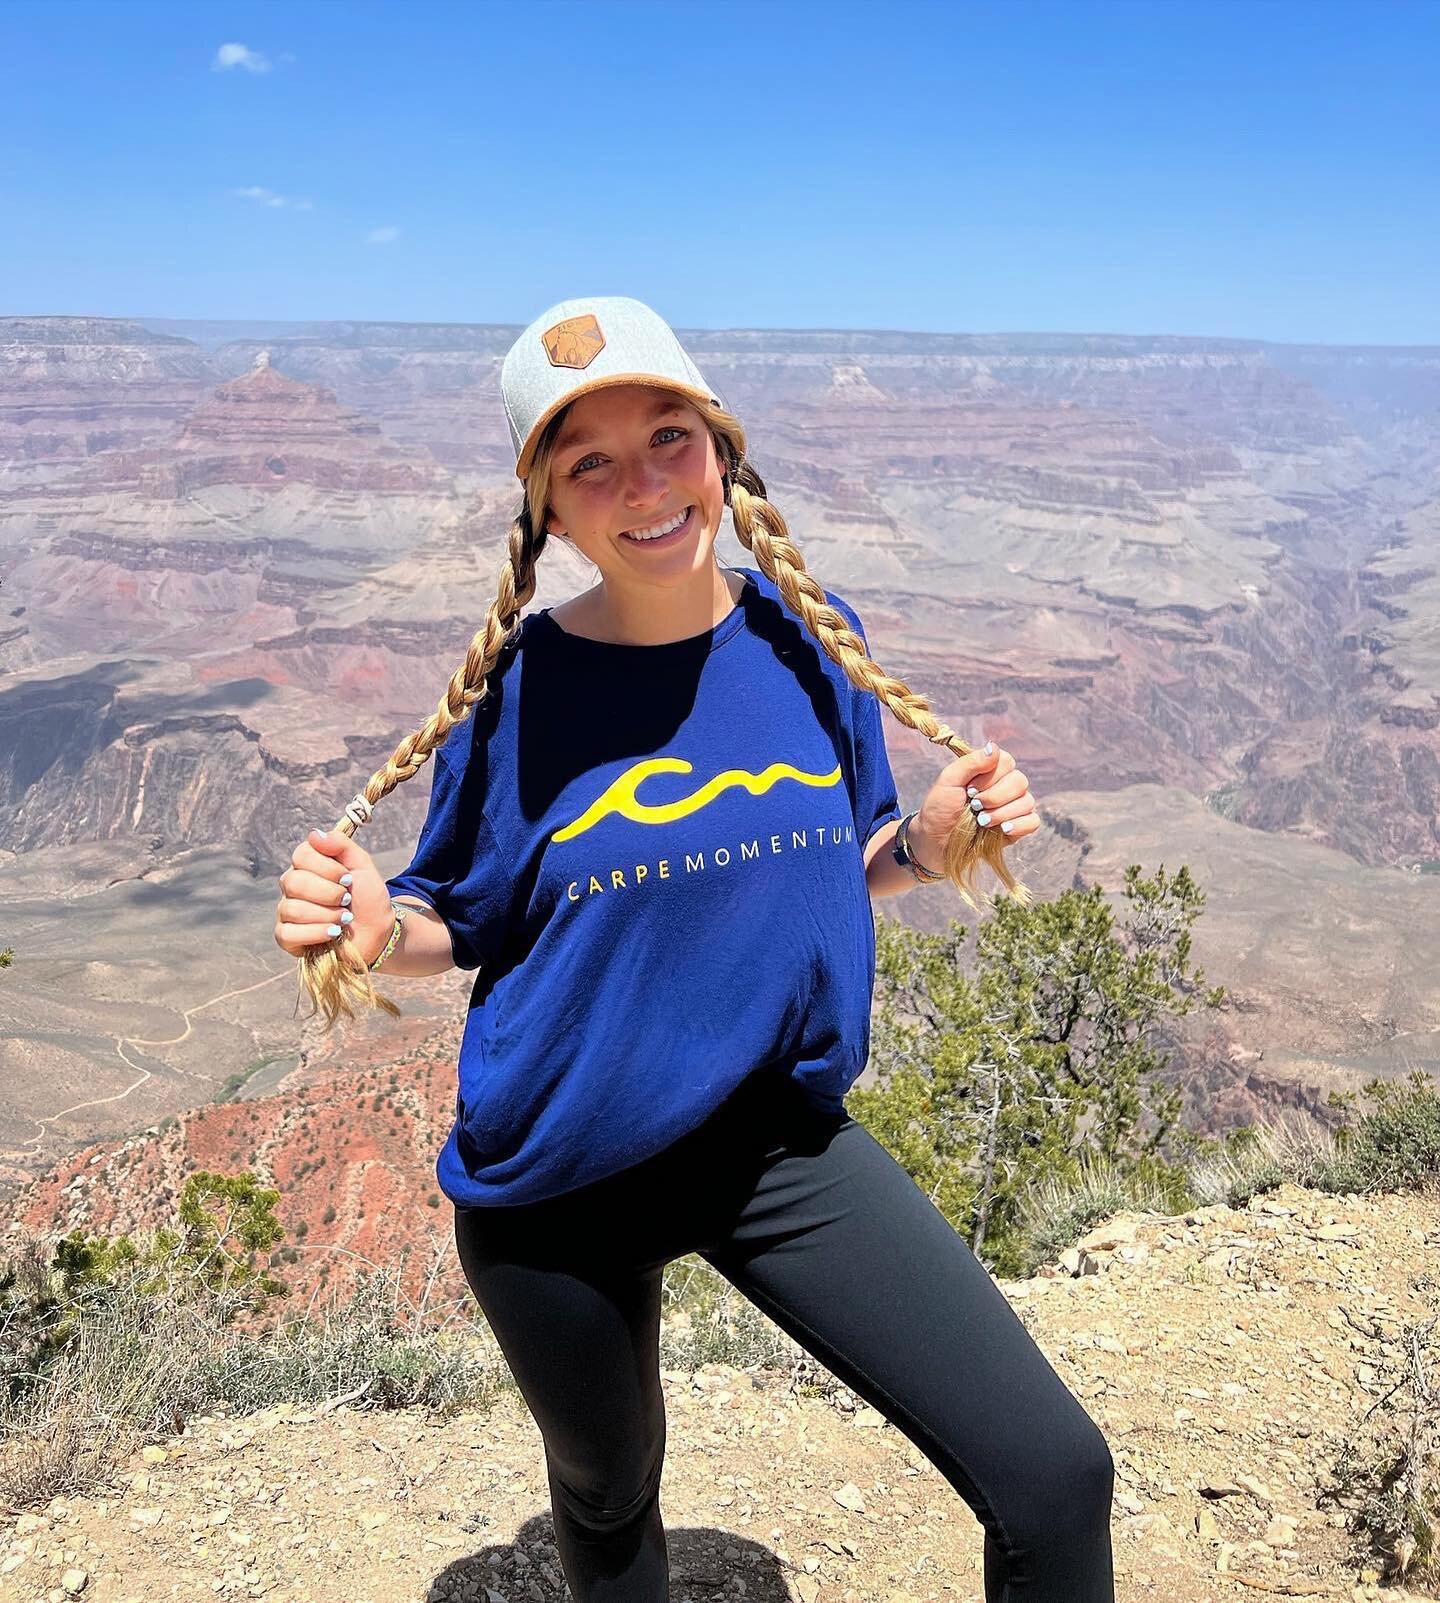 &ldquo;The captivating beauty of this world is meant to be explored. I have always loved adventure and wherever I am led to go, I go. Utah and Arizona hold some of the most breathtaking views out there. I am very grateful to have been able to seize m